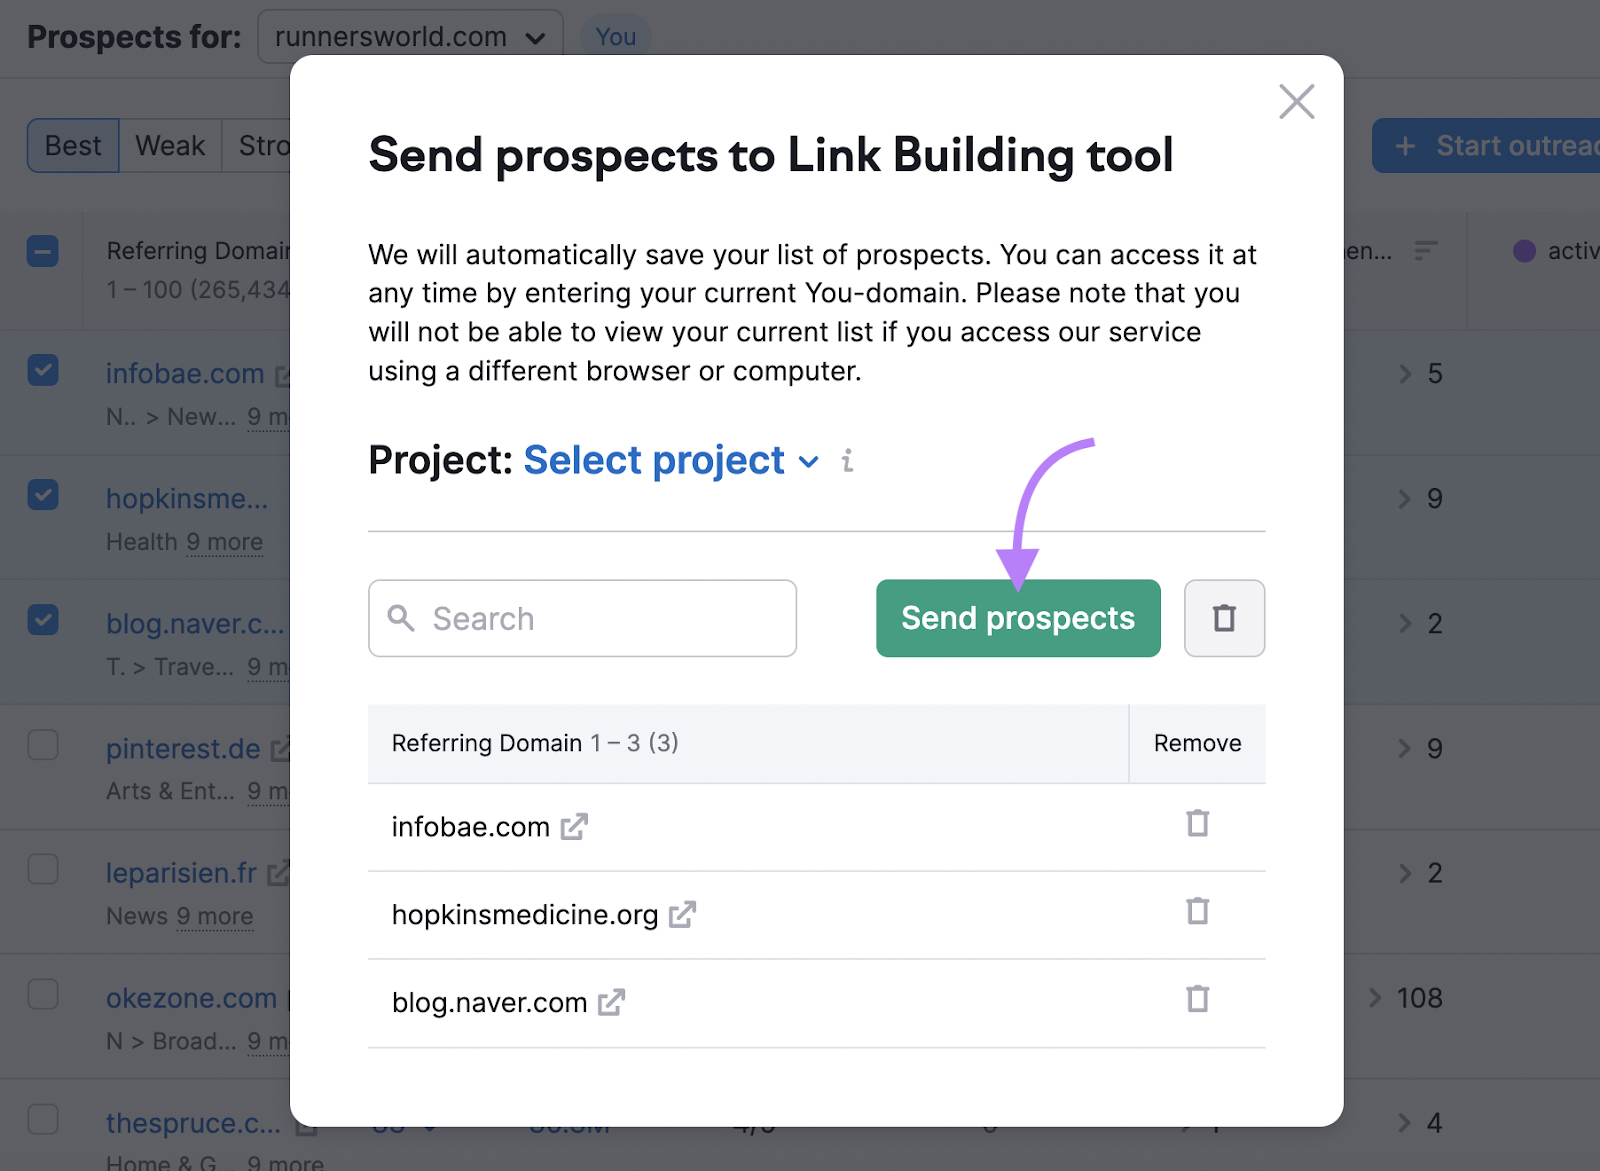 "Send prospects to Link Building Tool" pop up window